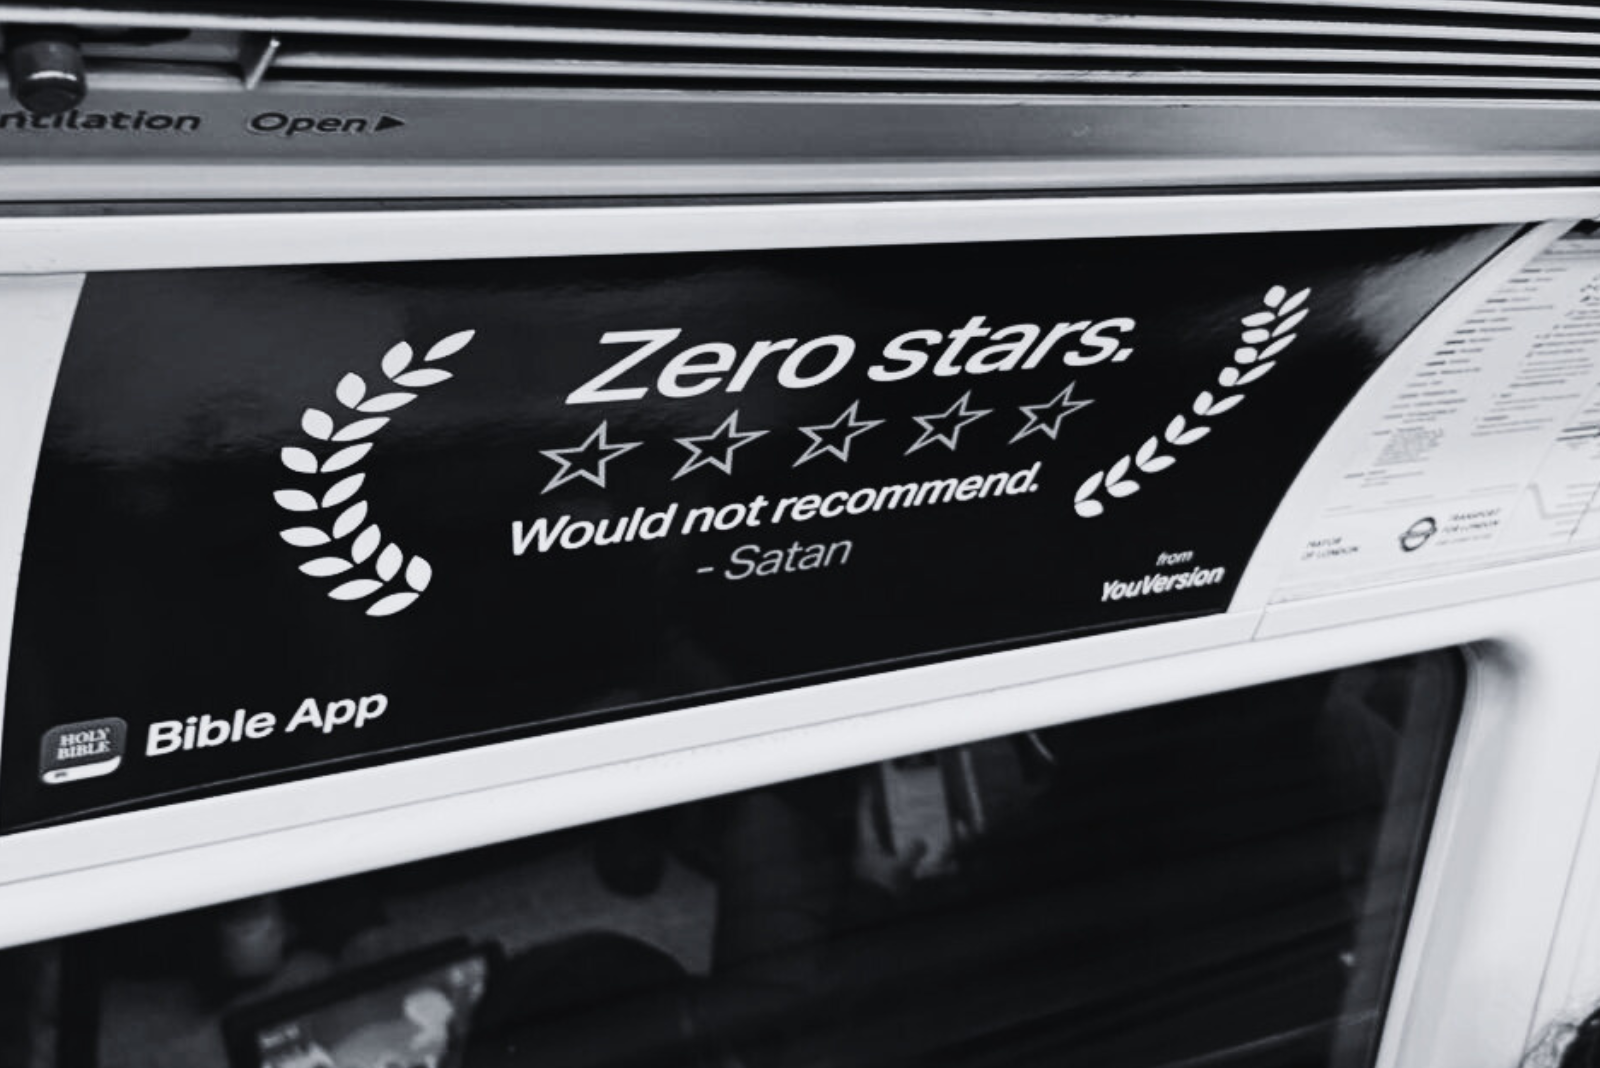 Advert on London Underground showing a review with zero stars.